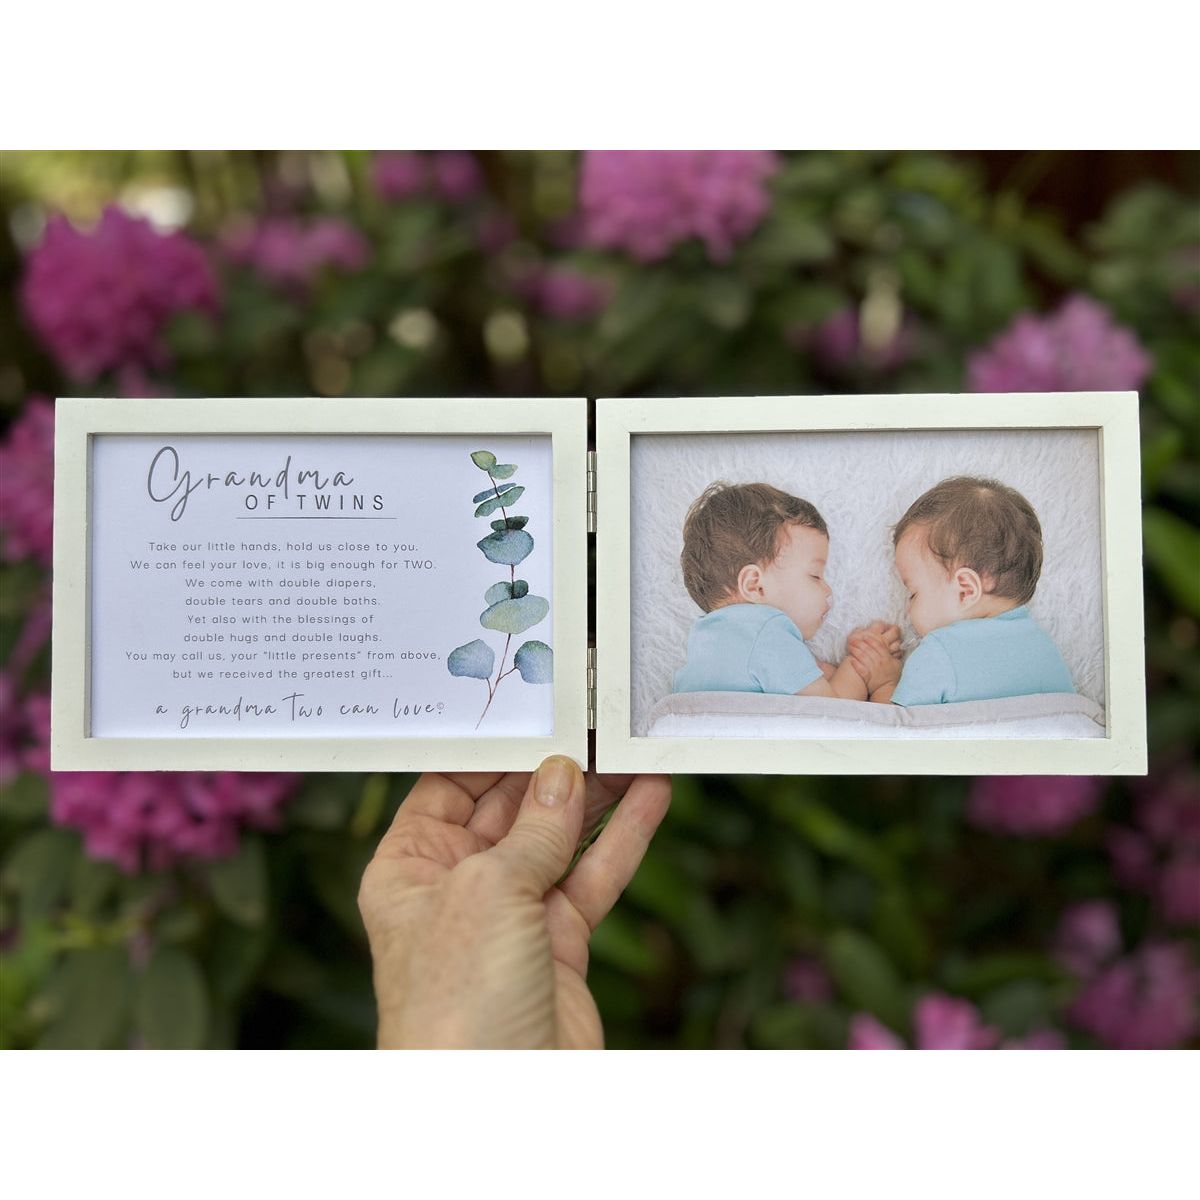 Grandma of Twins photo frame being held in a hand.